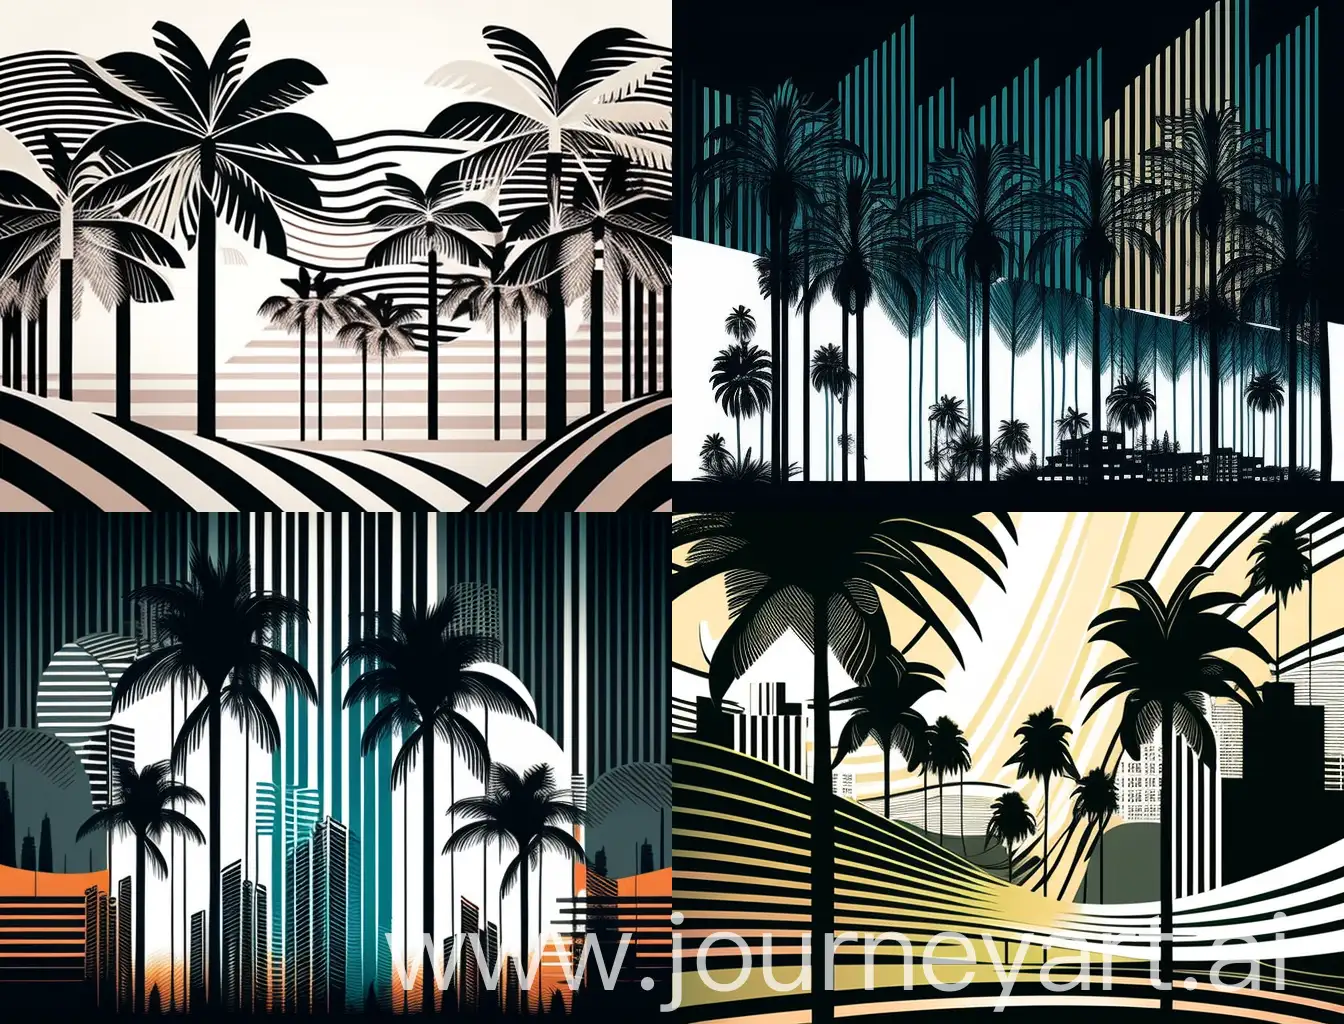 urban cities made of several thin stripes, with coconut trees, in vector
